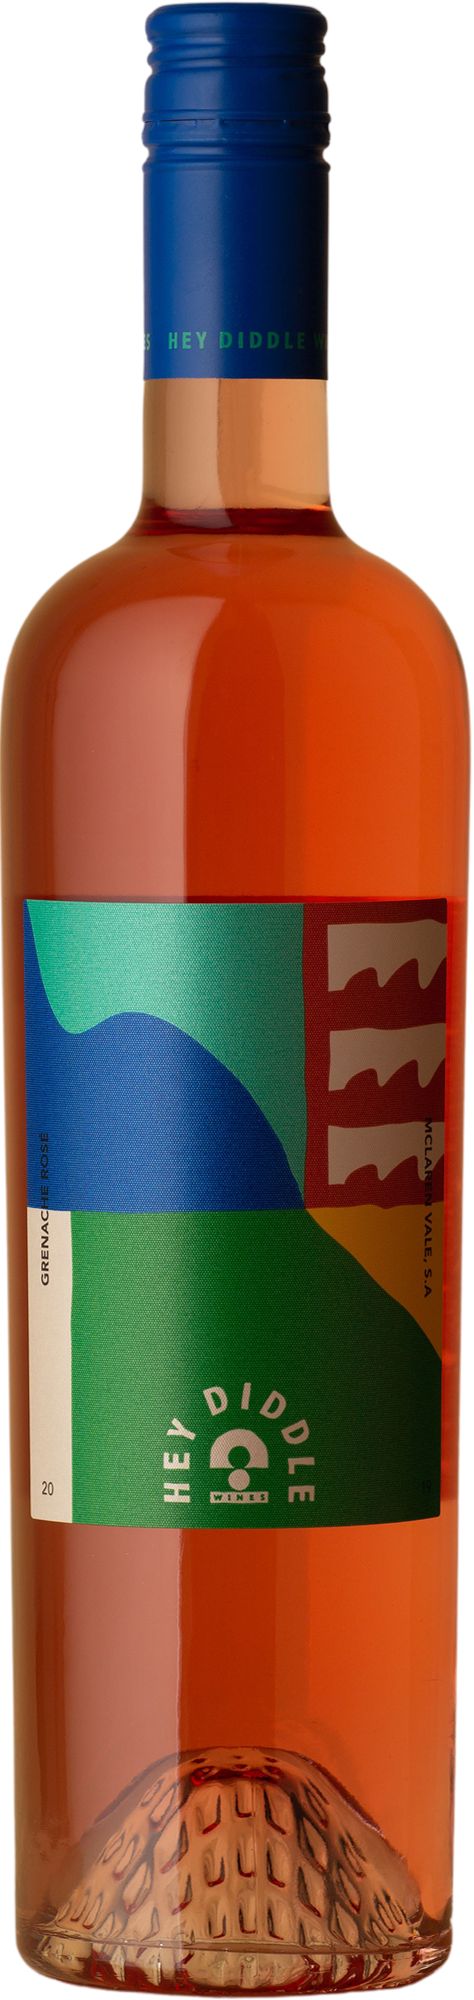 Hey Diddle - Grenache Rosé 2019 Rose